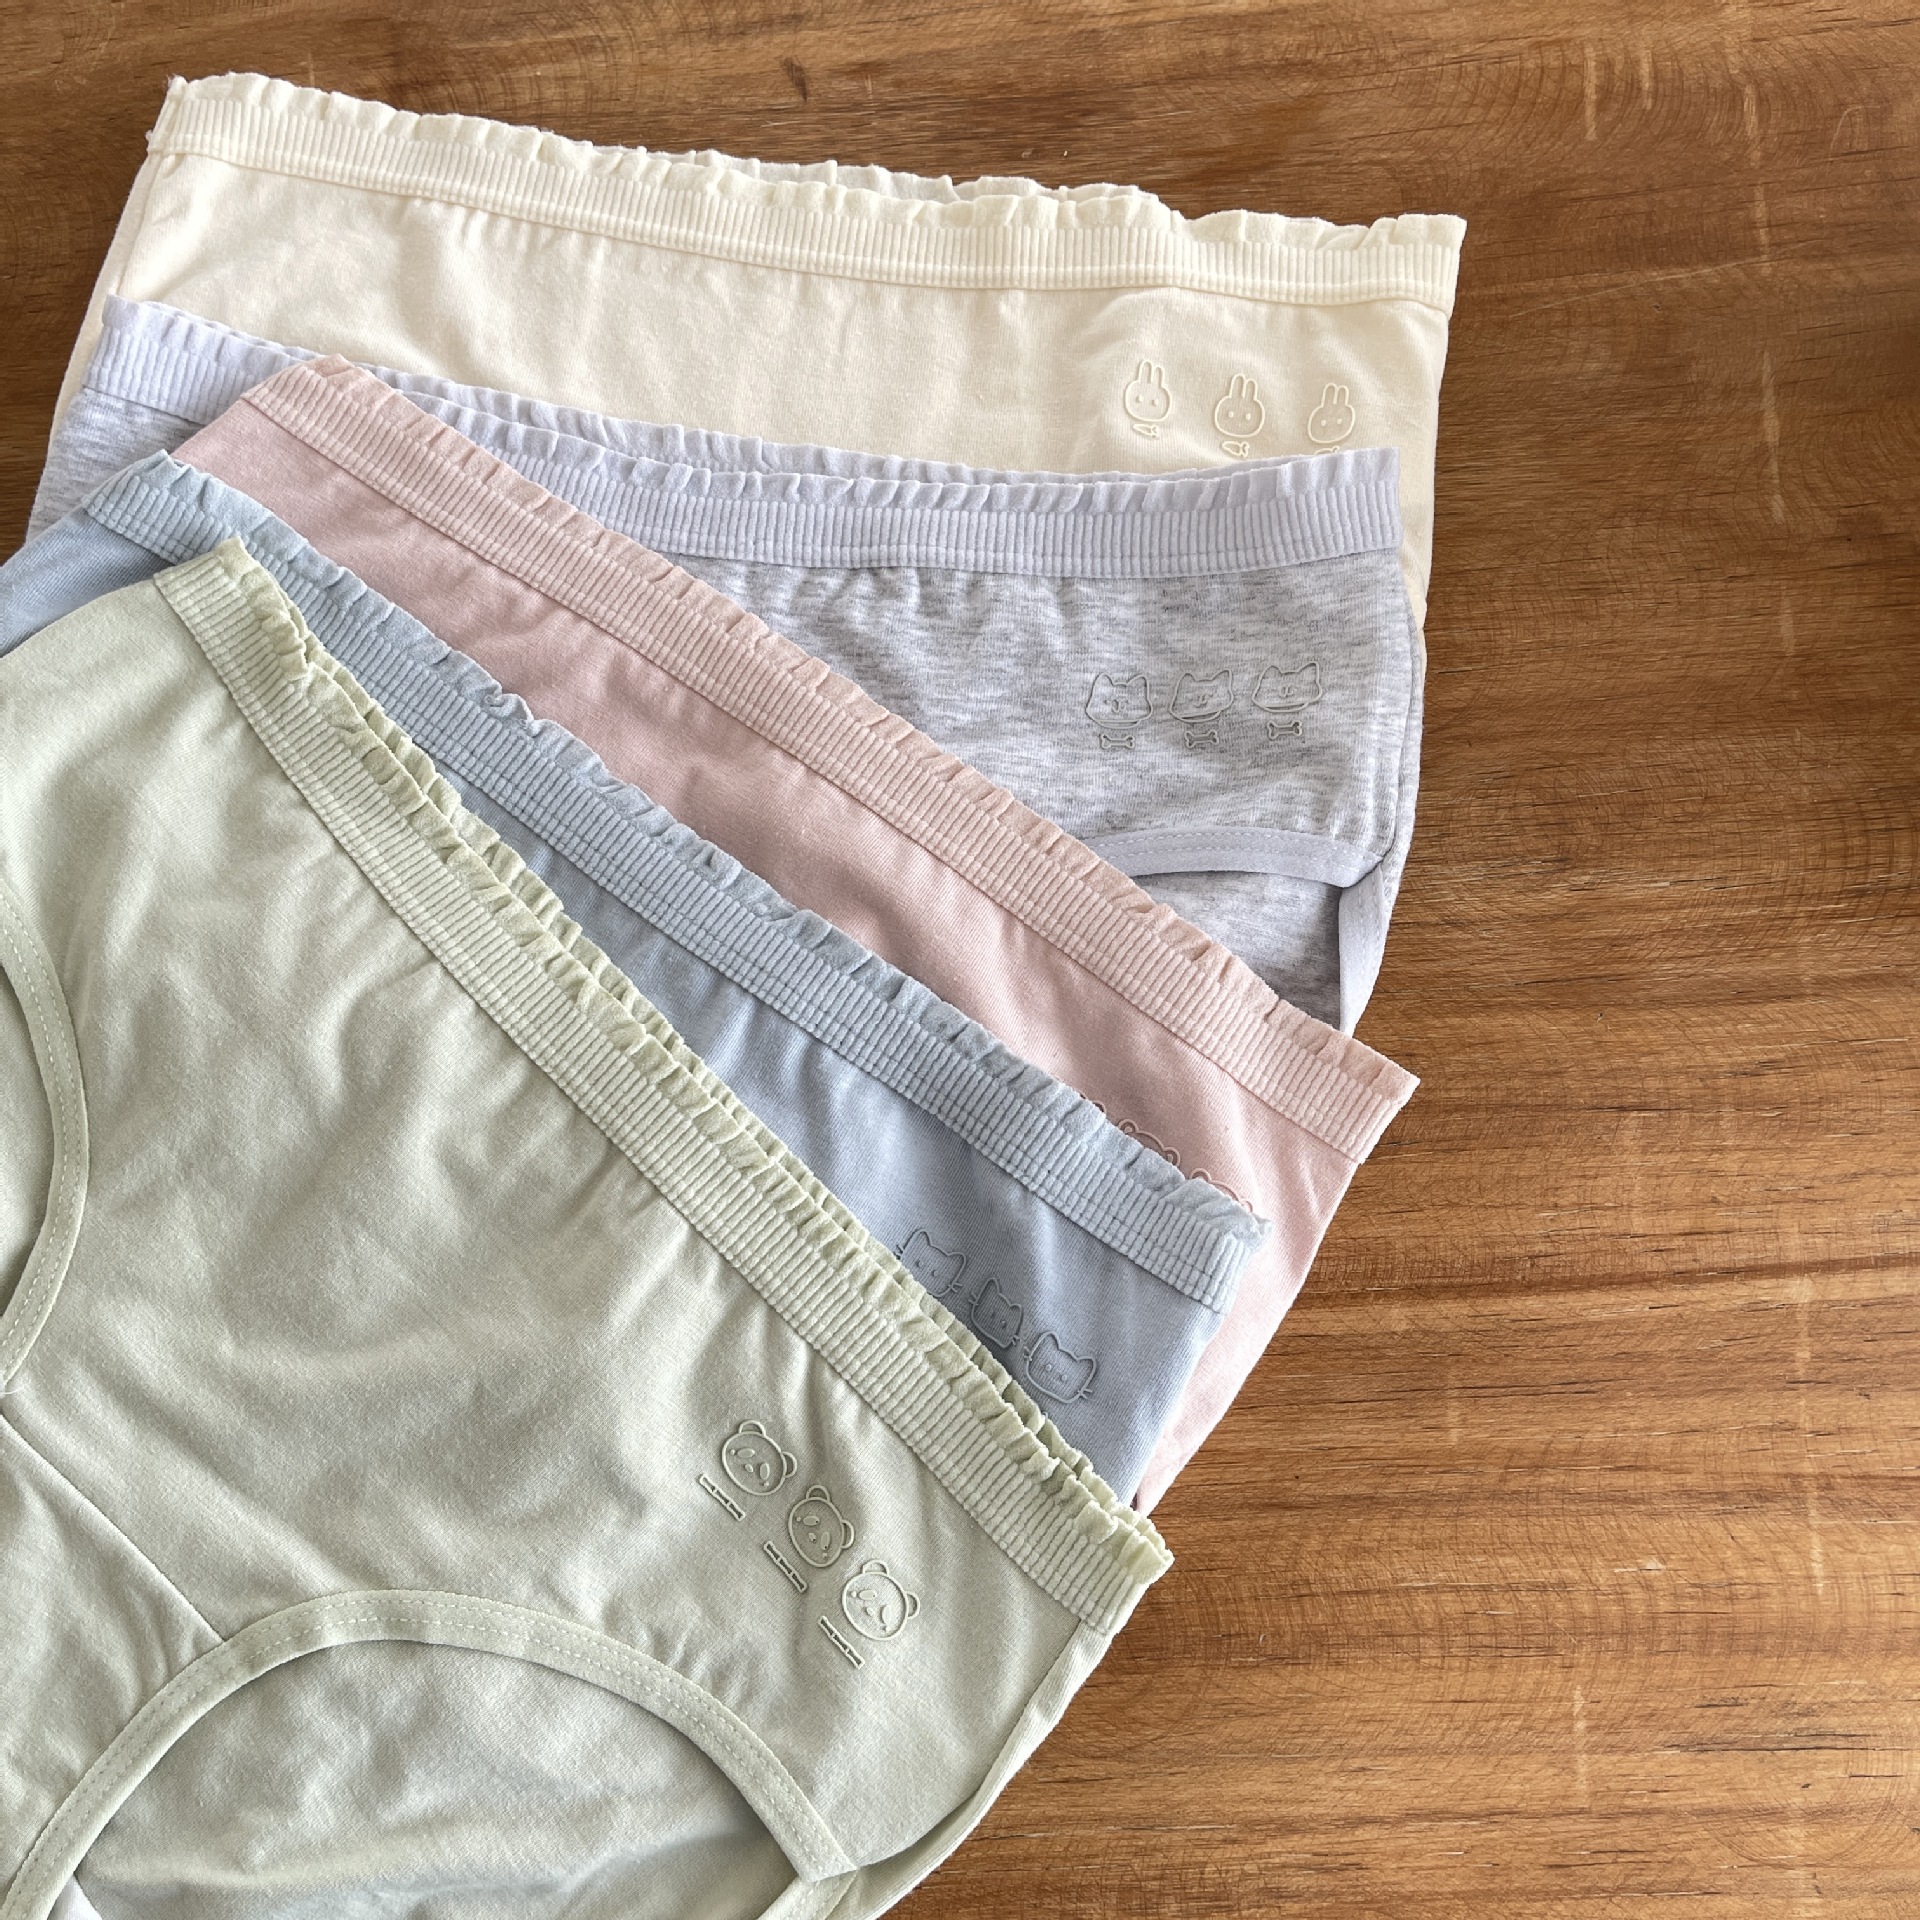 Ka Meow ~ Student Underwear Women's Cotton Summer Solid Color Mid-Waist Seamless Japanese Cotton Crotch Simple Girl Briefs